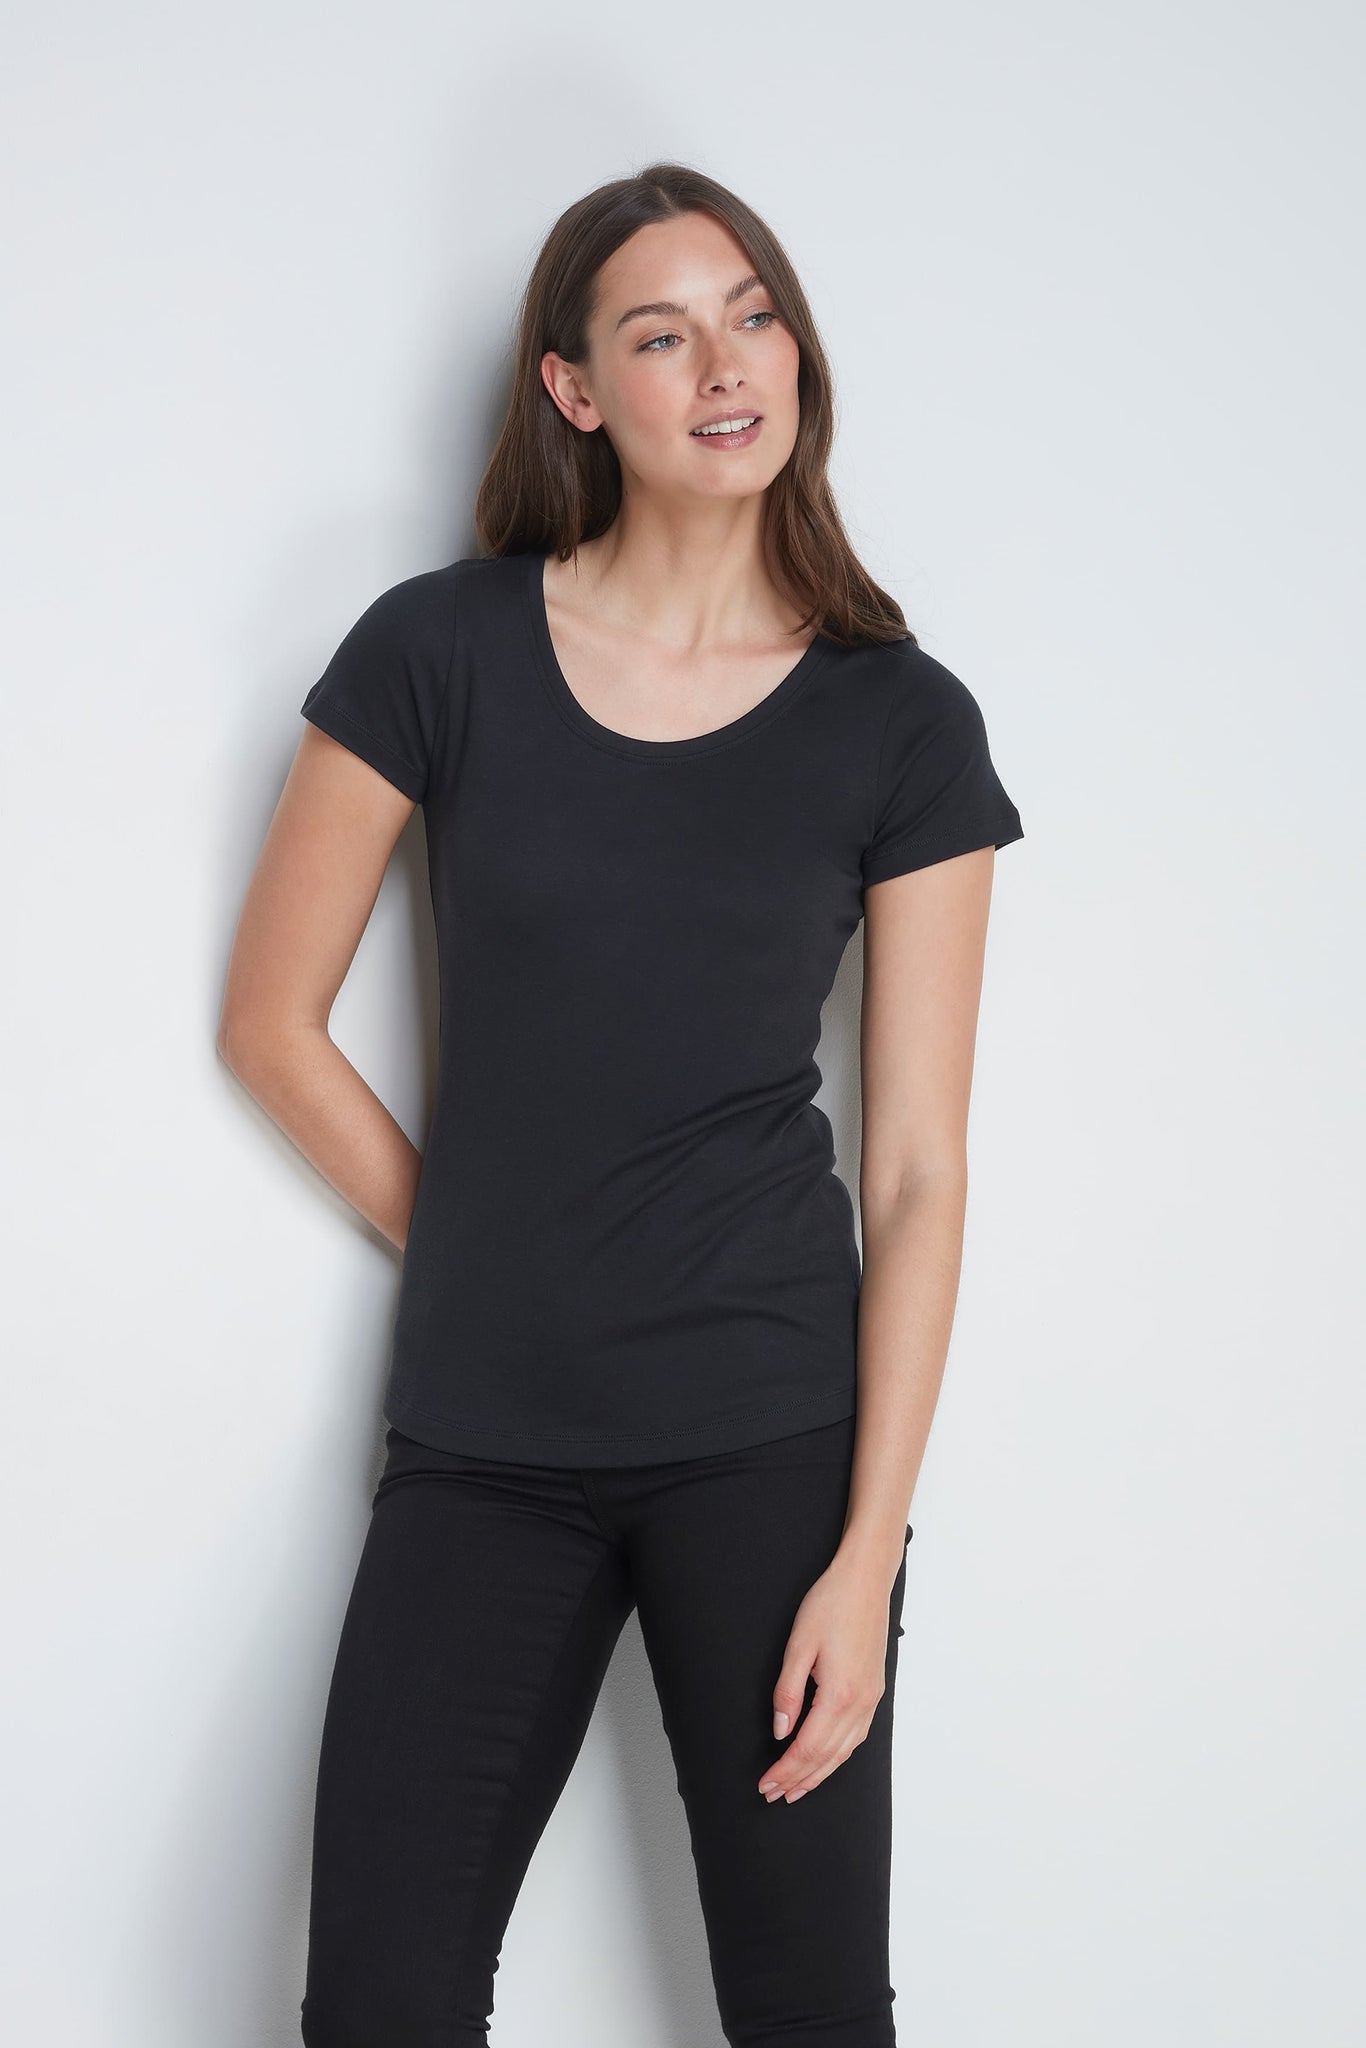 Quality Scoop Neck Cotton Modal Blend T-shirt in Black - Short Sleeve T-shirt by Lavender Hill Clothing